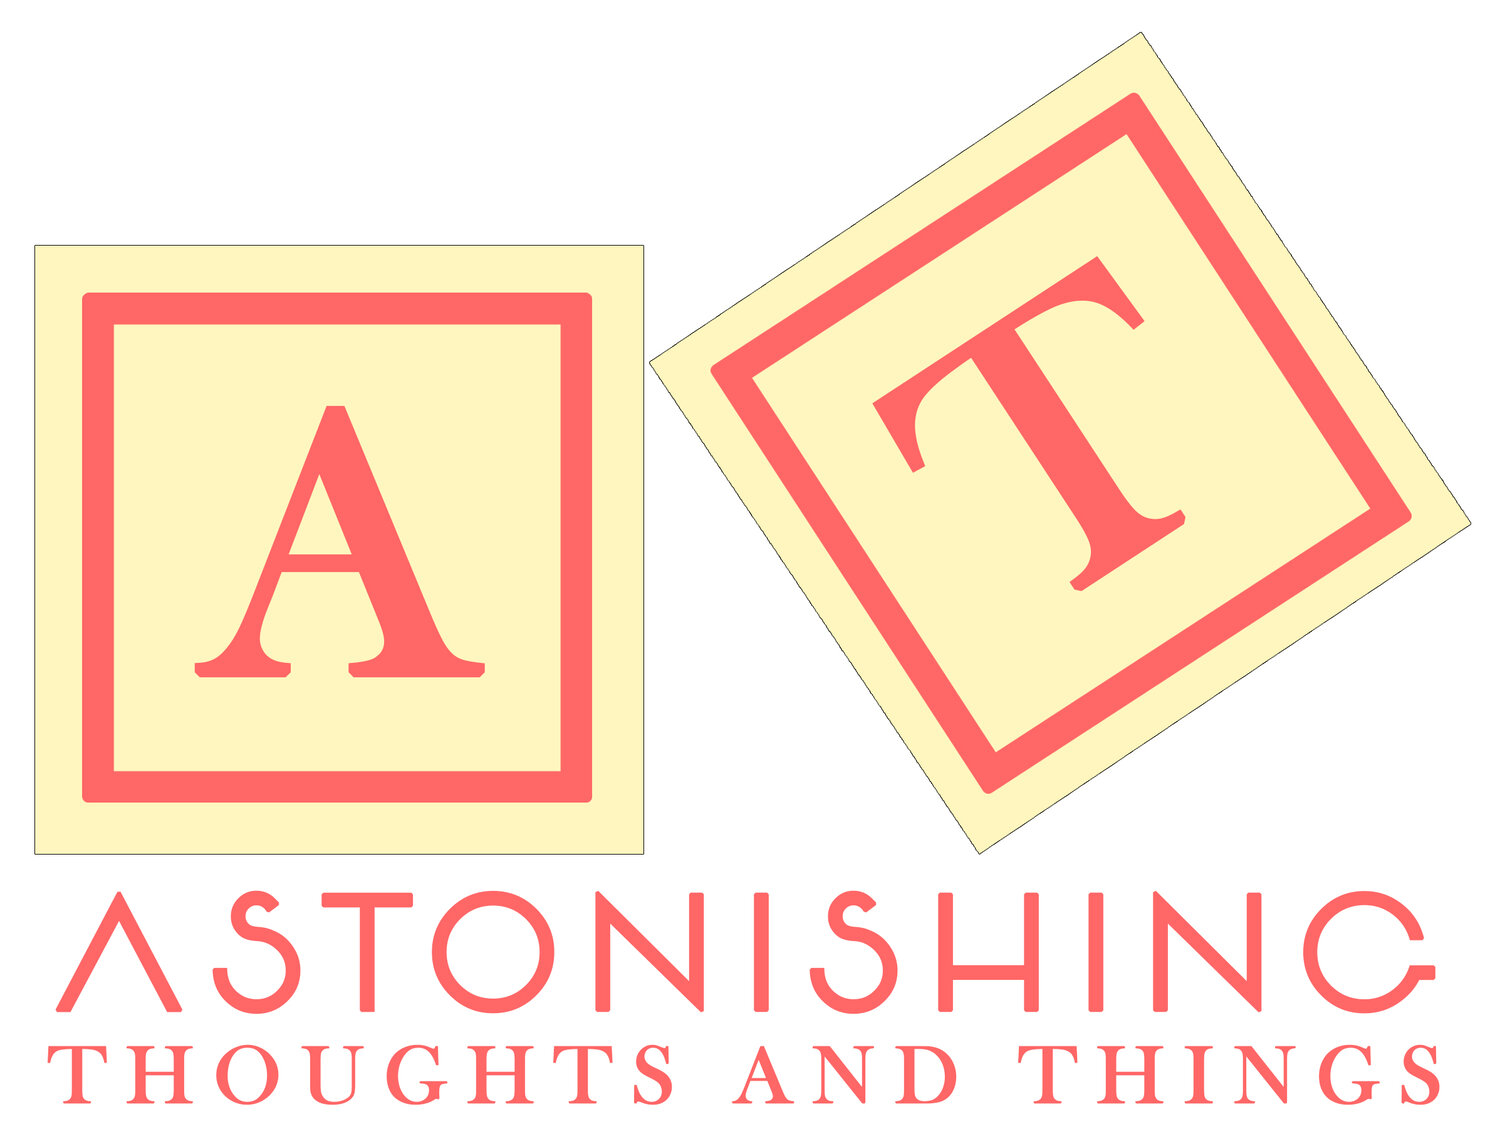 Astonishing Thoughts and Things